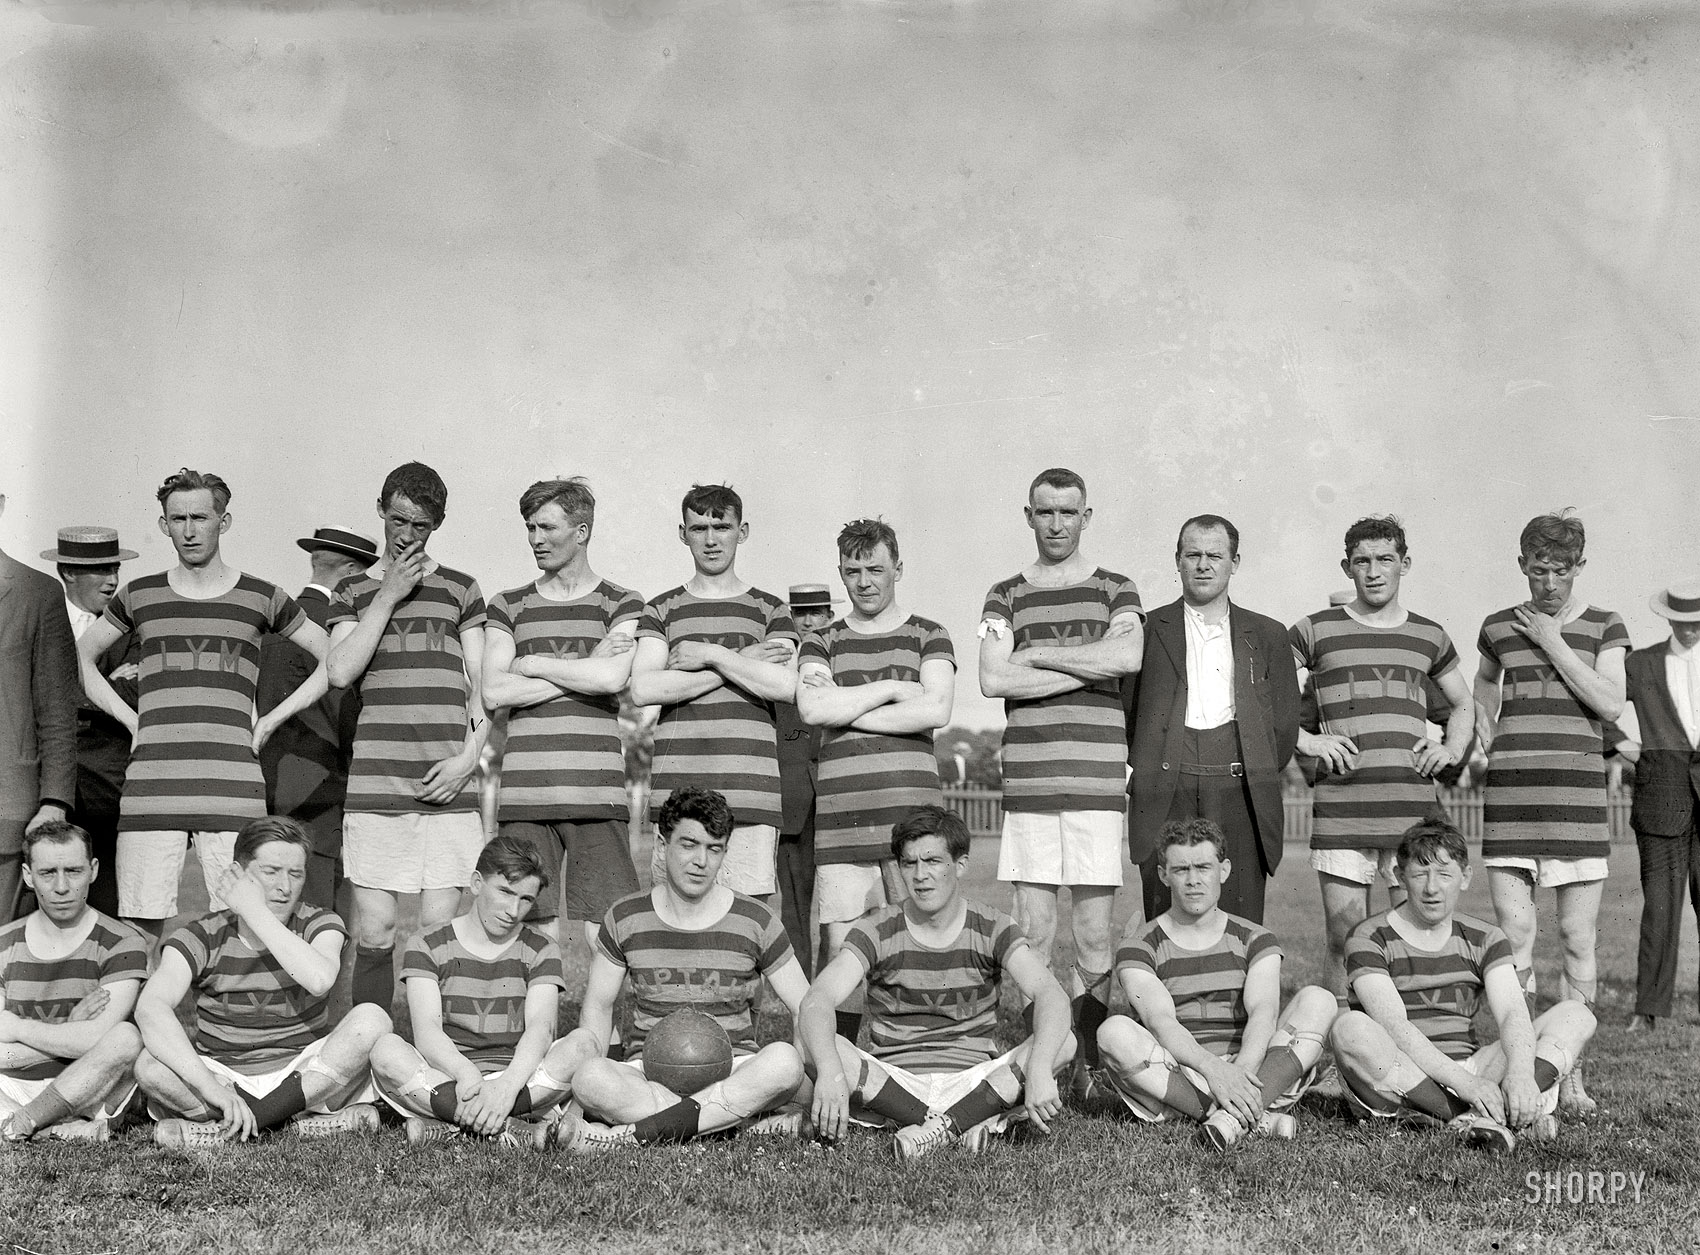 New York circa 1914. "Leitrim football (soccer) team." Or perhaps more accurately, Gaelic football. On this day it was the Leitrim Young Men's Society against Cavan. 5x7 glass negative, Bain News Service. View full size.